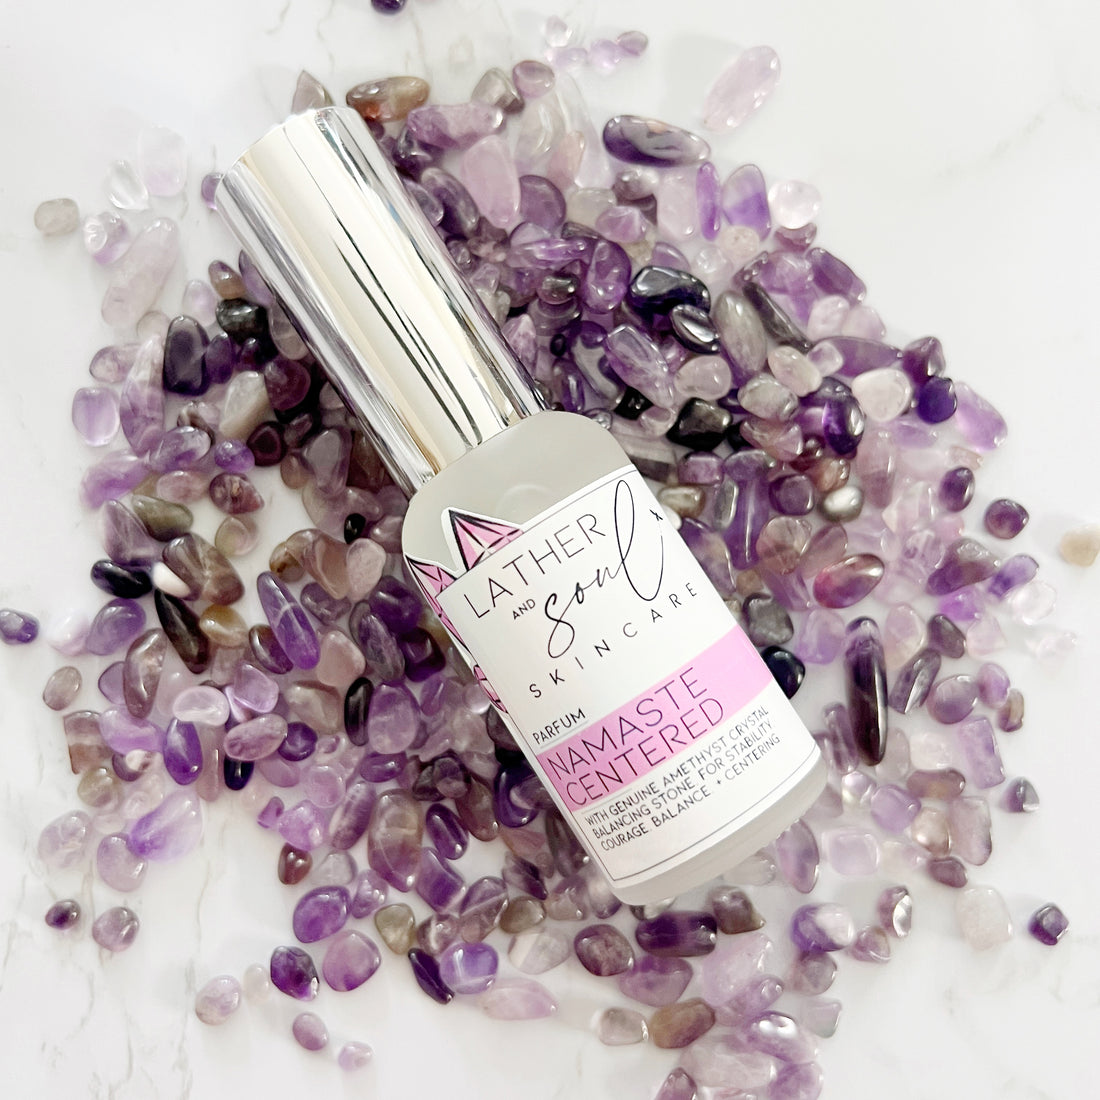 Crystal infused fine fragrance with amethyst.